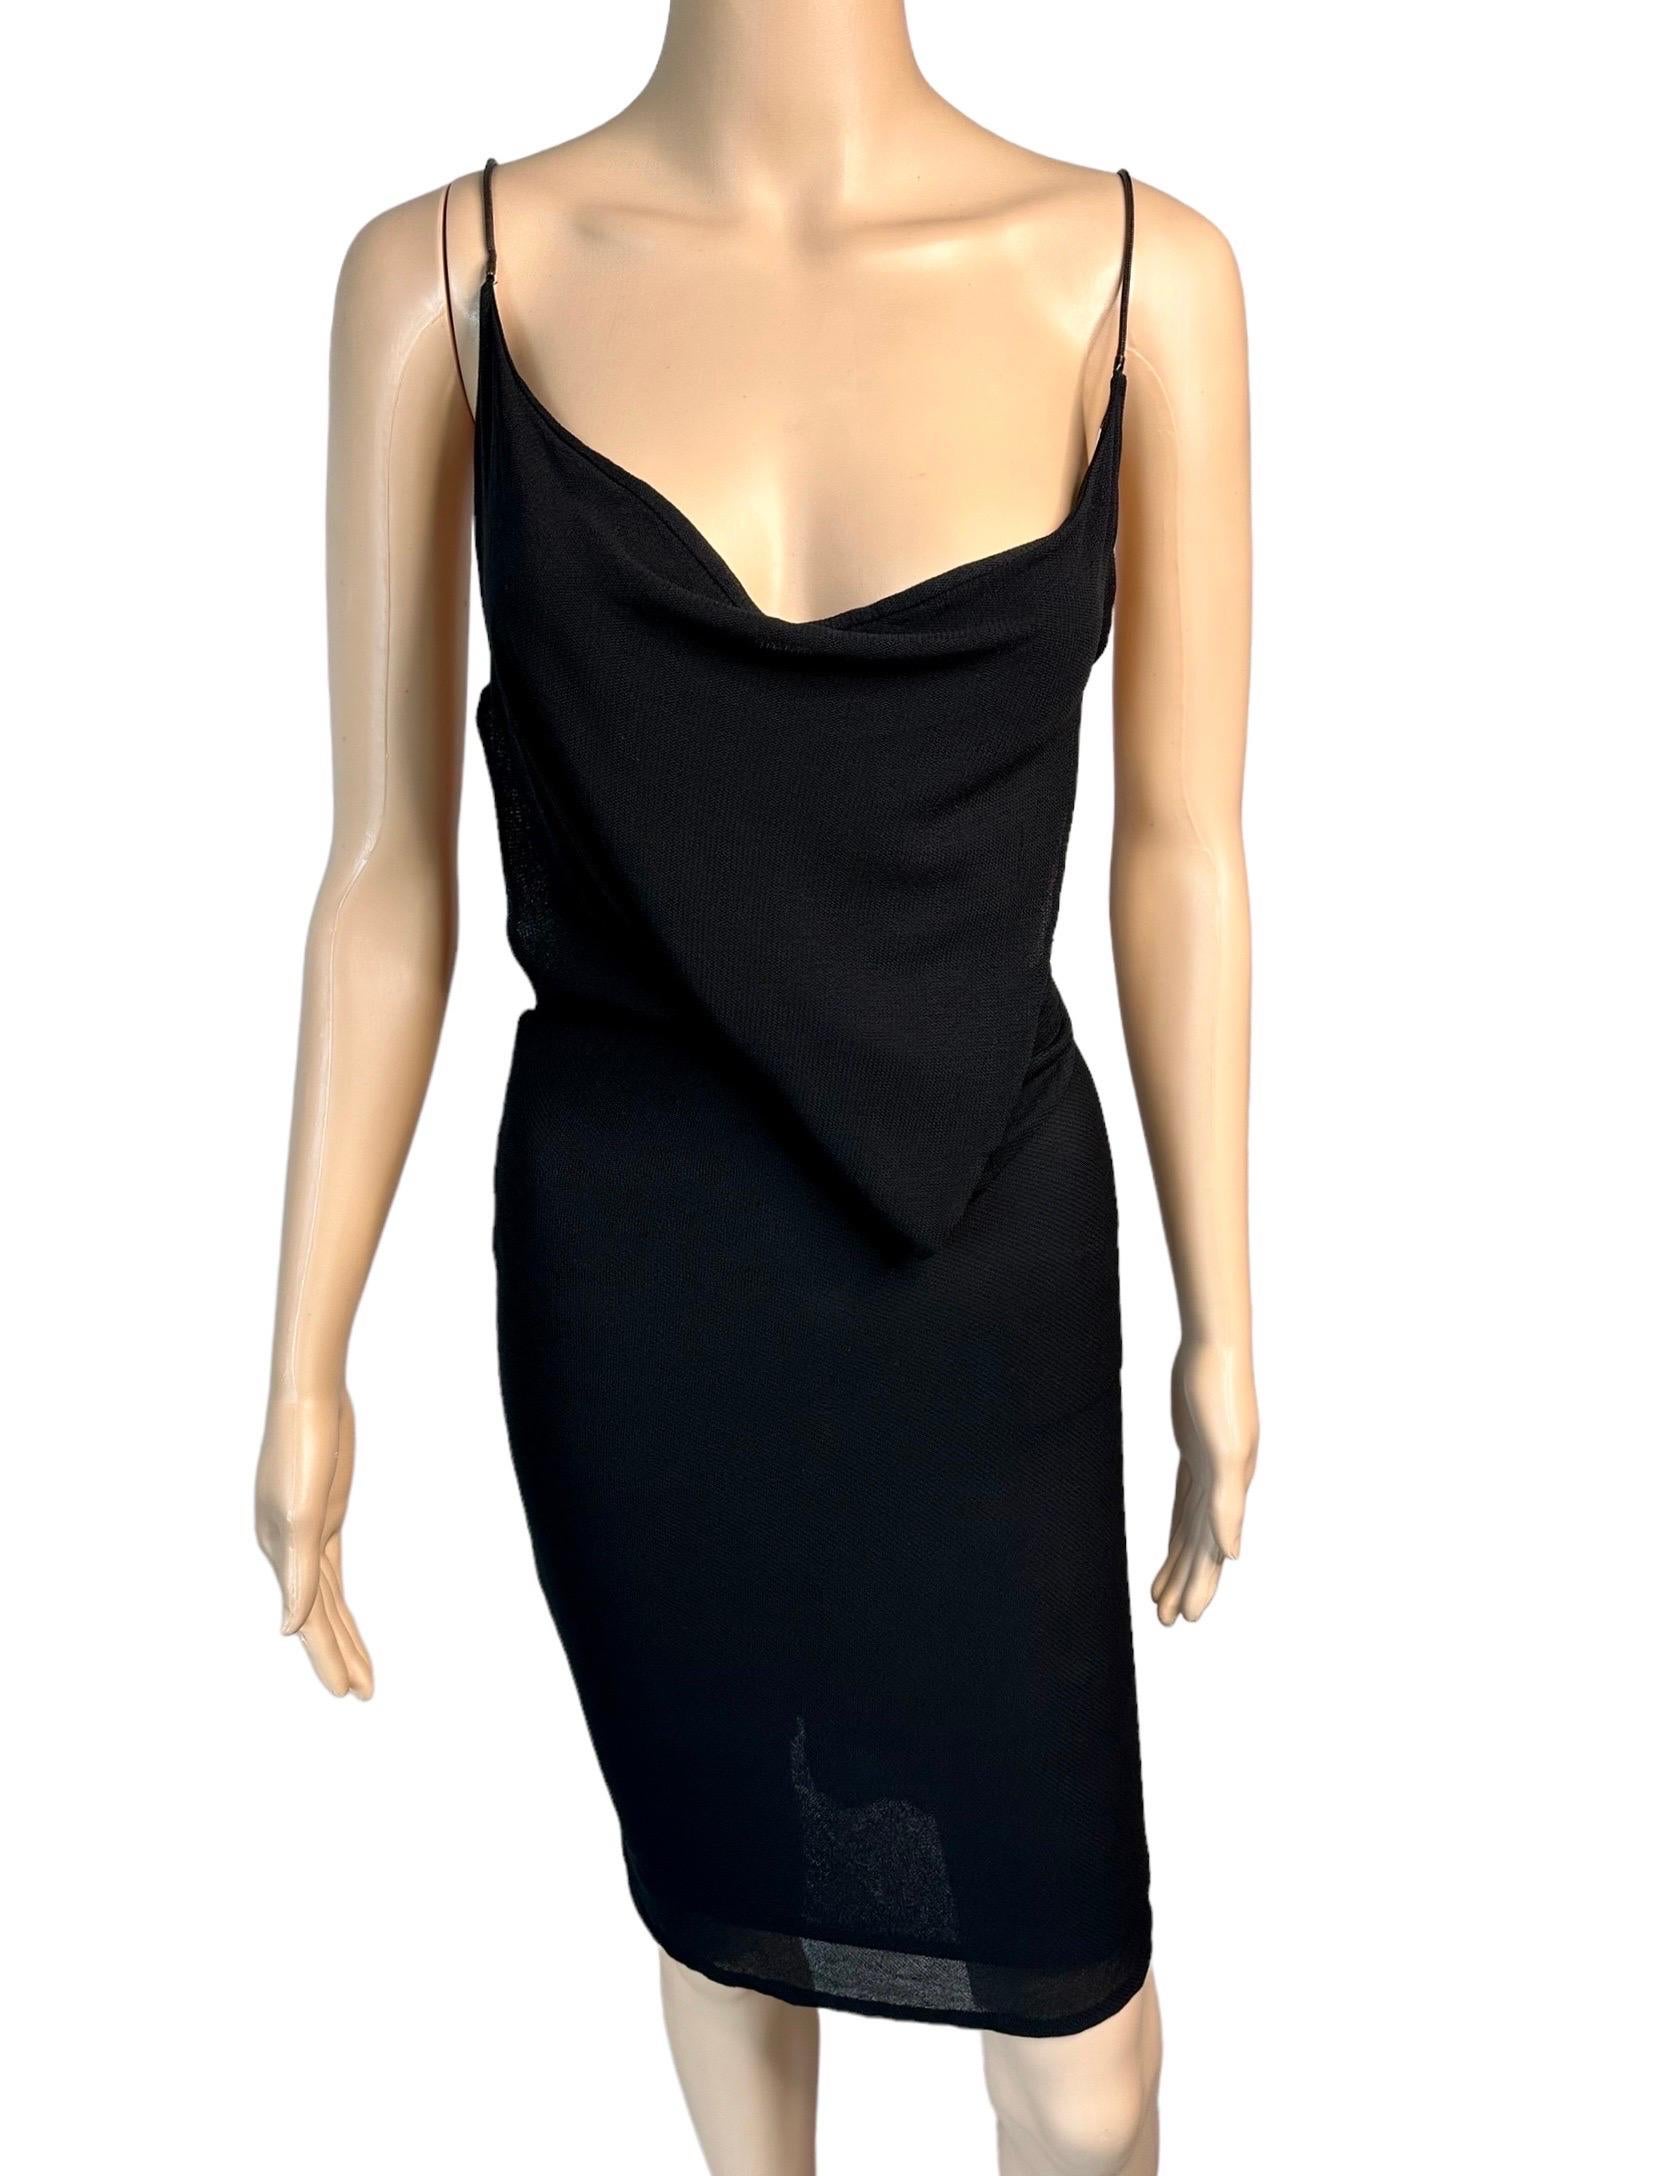 Tom Ford for Gucci S/S 1997 Runway Chain Cutout Backless Sheer Knit Black Dress For Sale 7